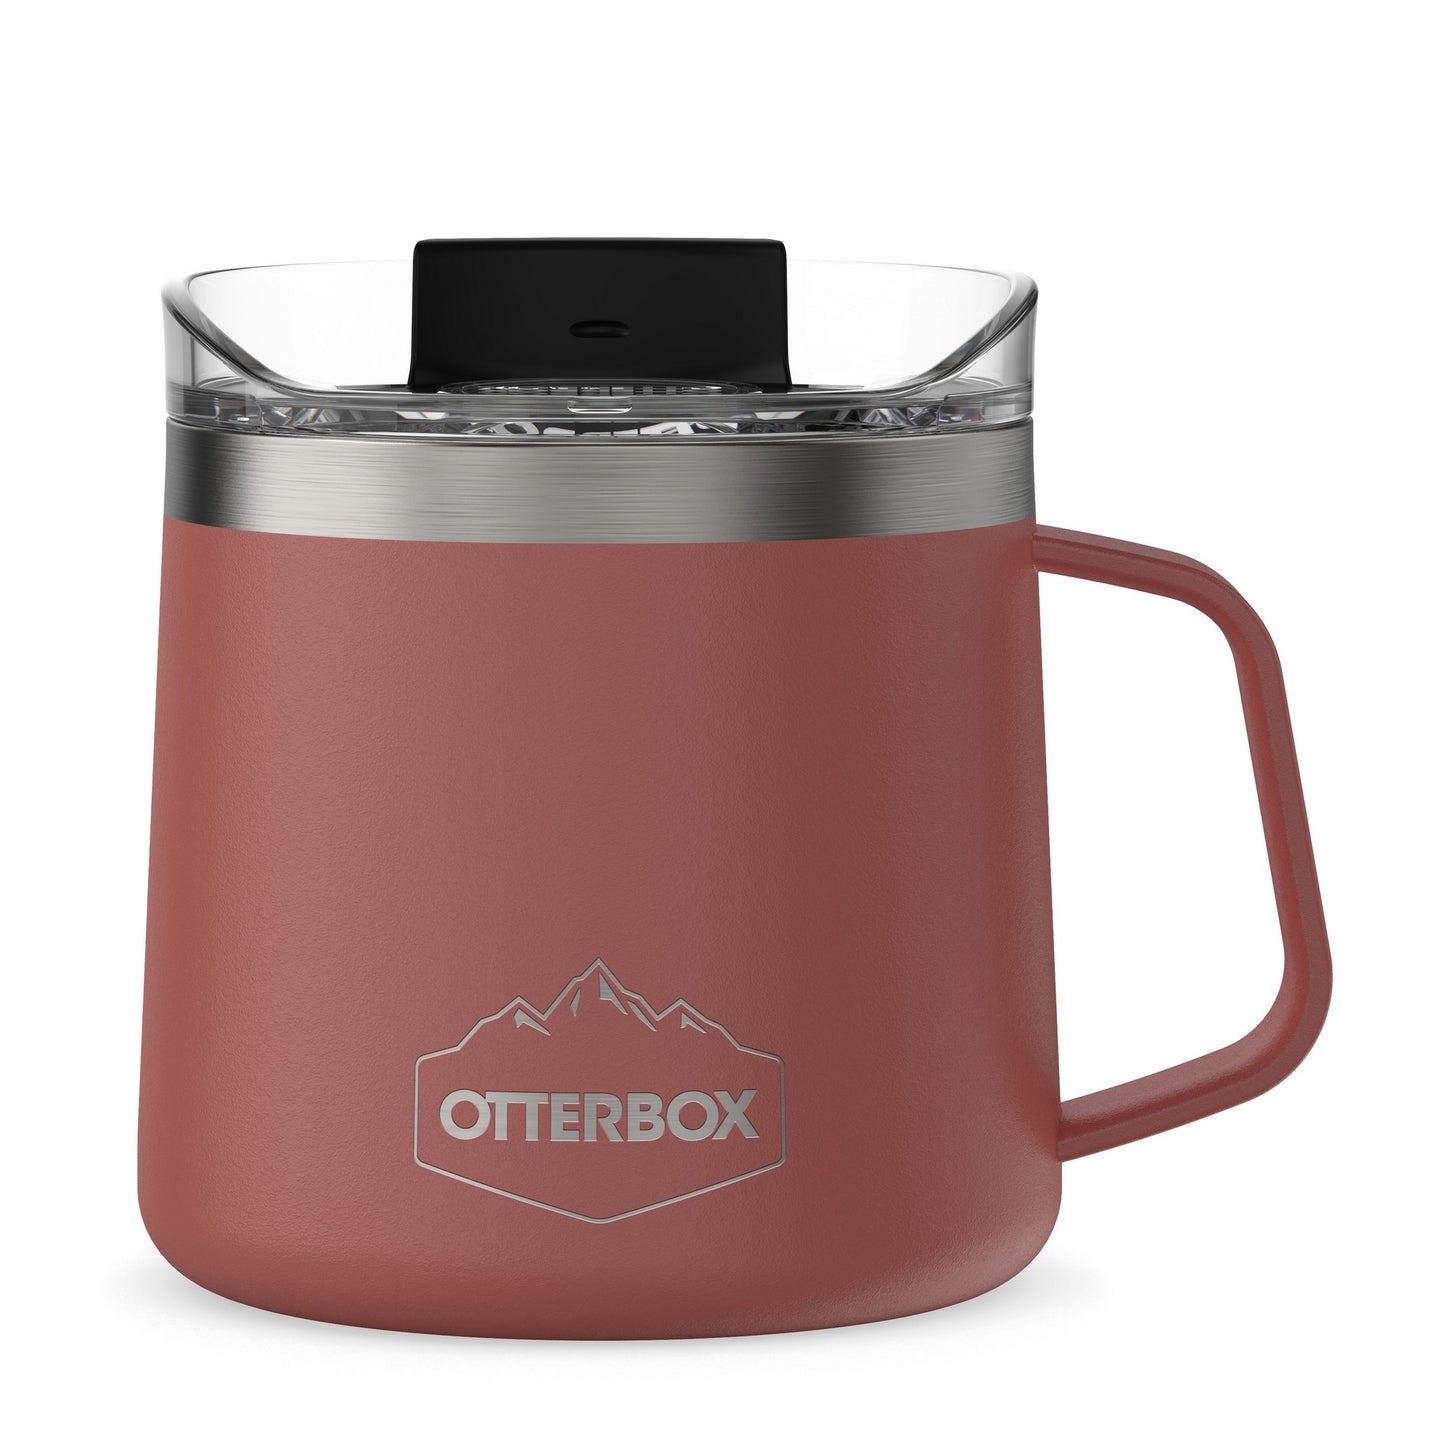 Otterbox Stainless Steel Red/Silver (Baked Mud) Elevation 14oz Mug w/ Closed Lid - 15-06559